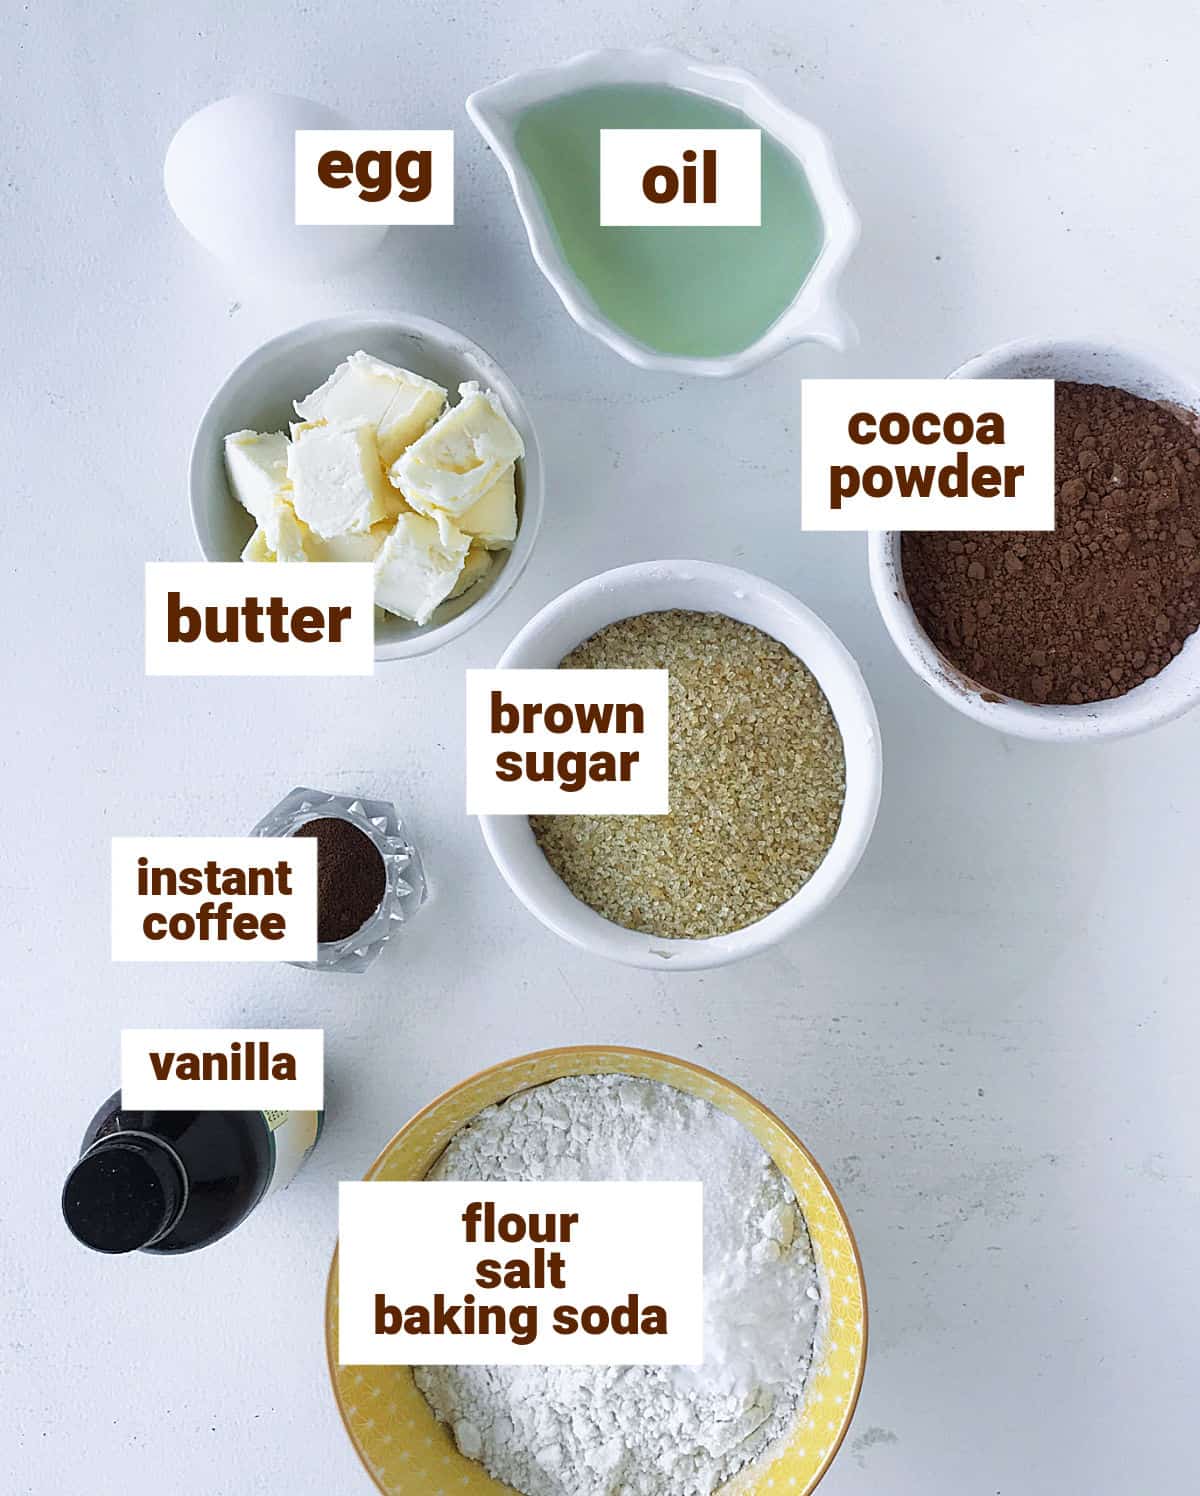 Different bowls with ingredients for chocolate whoopie pies, including egg, cocoa powder and vanilla; text overlay